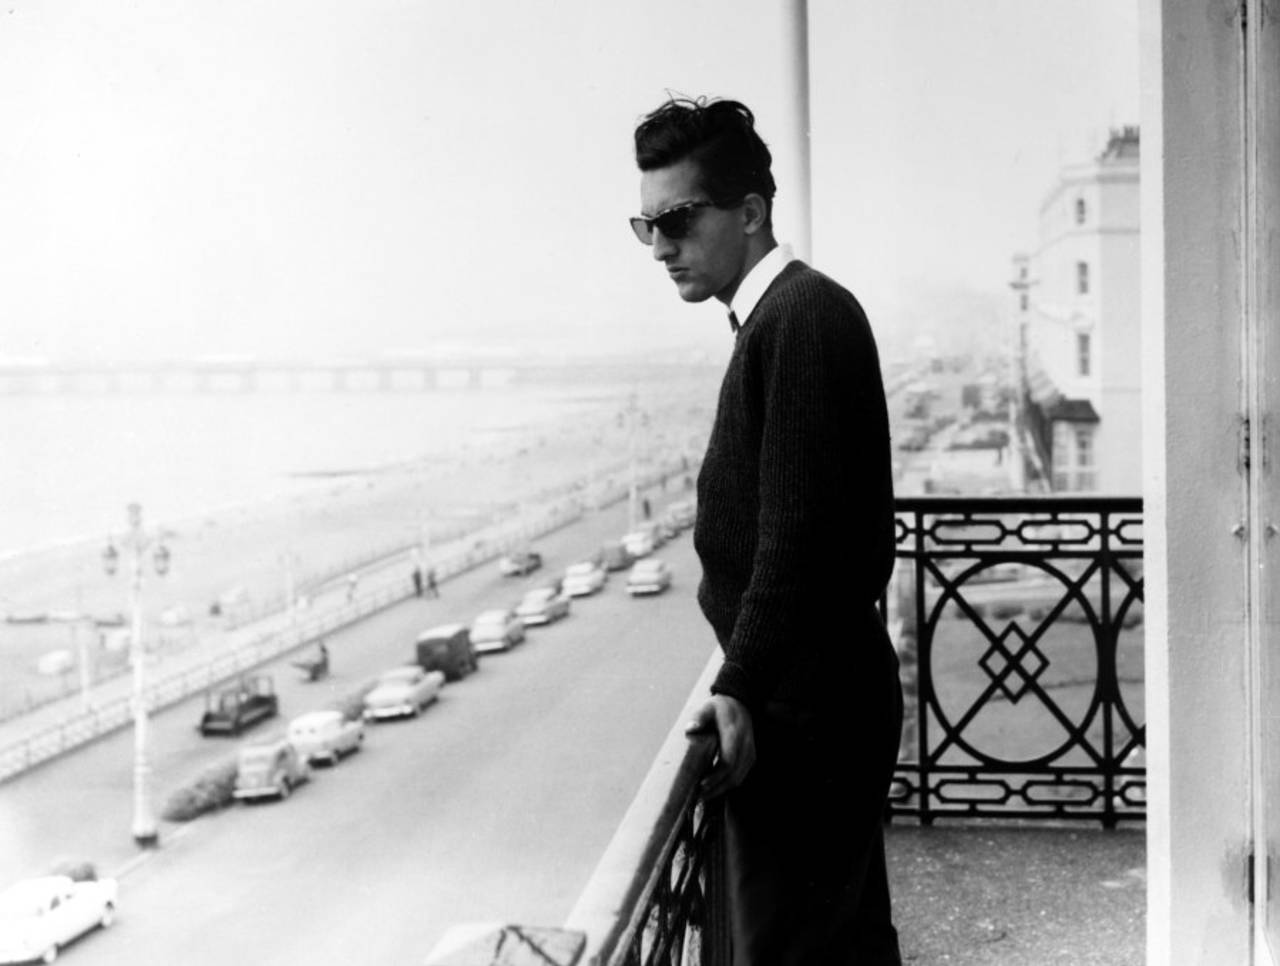 Mansur Ali Khan Pataudi stands on a balcony overlooking an esplanade and beach, 1961